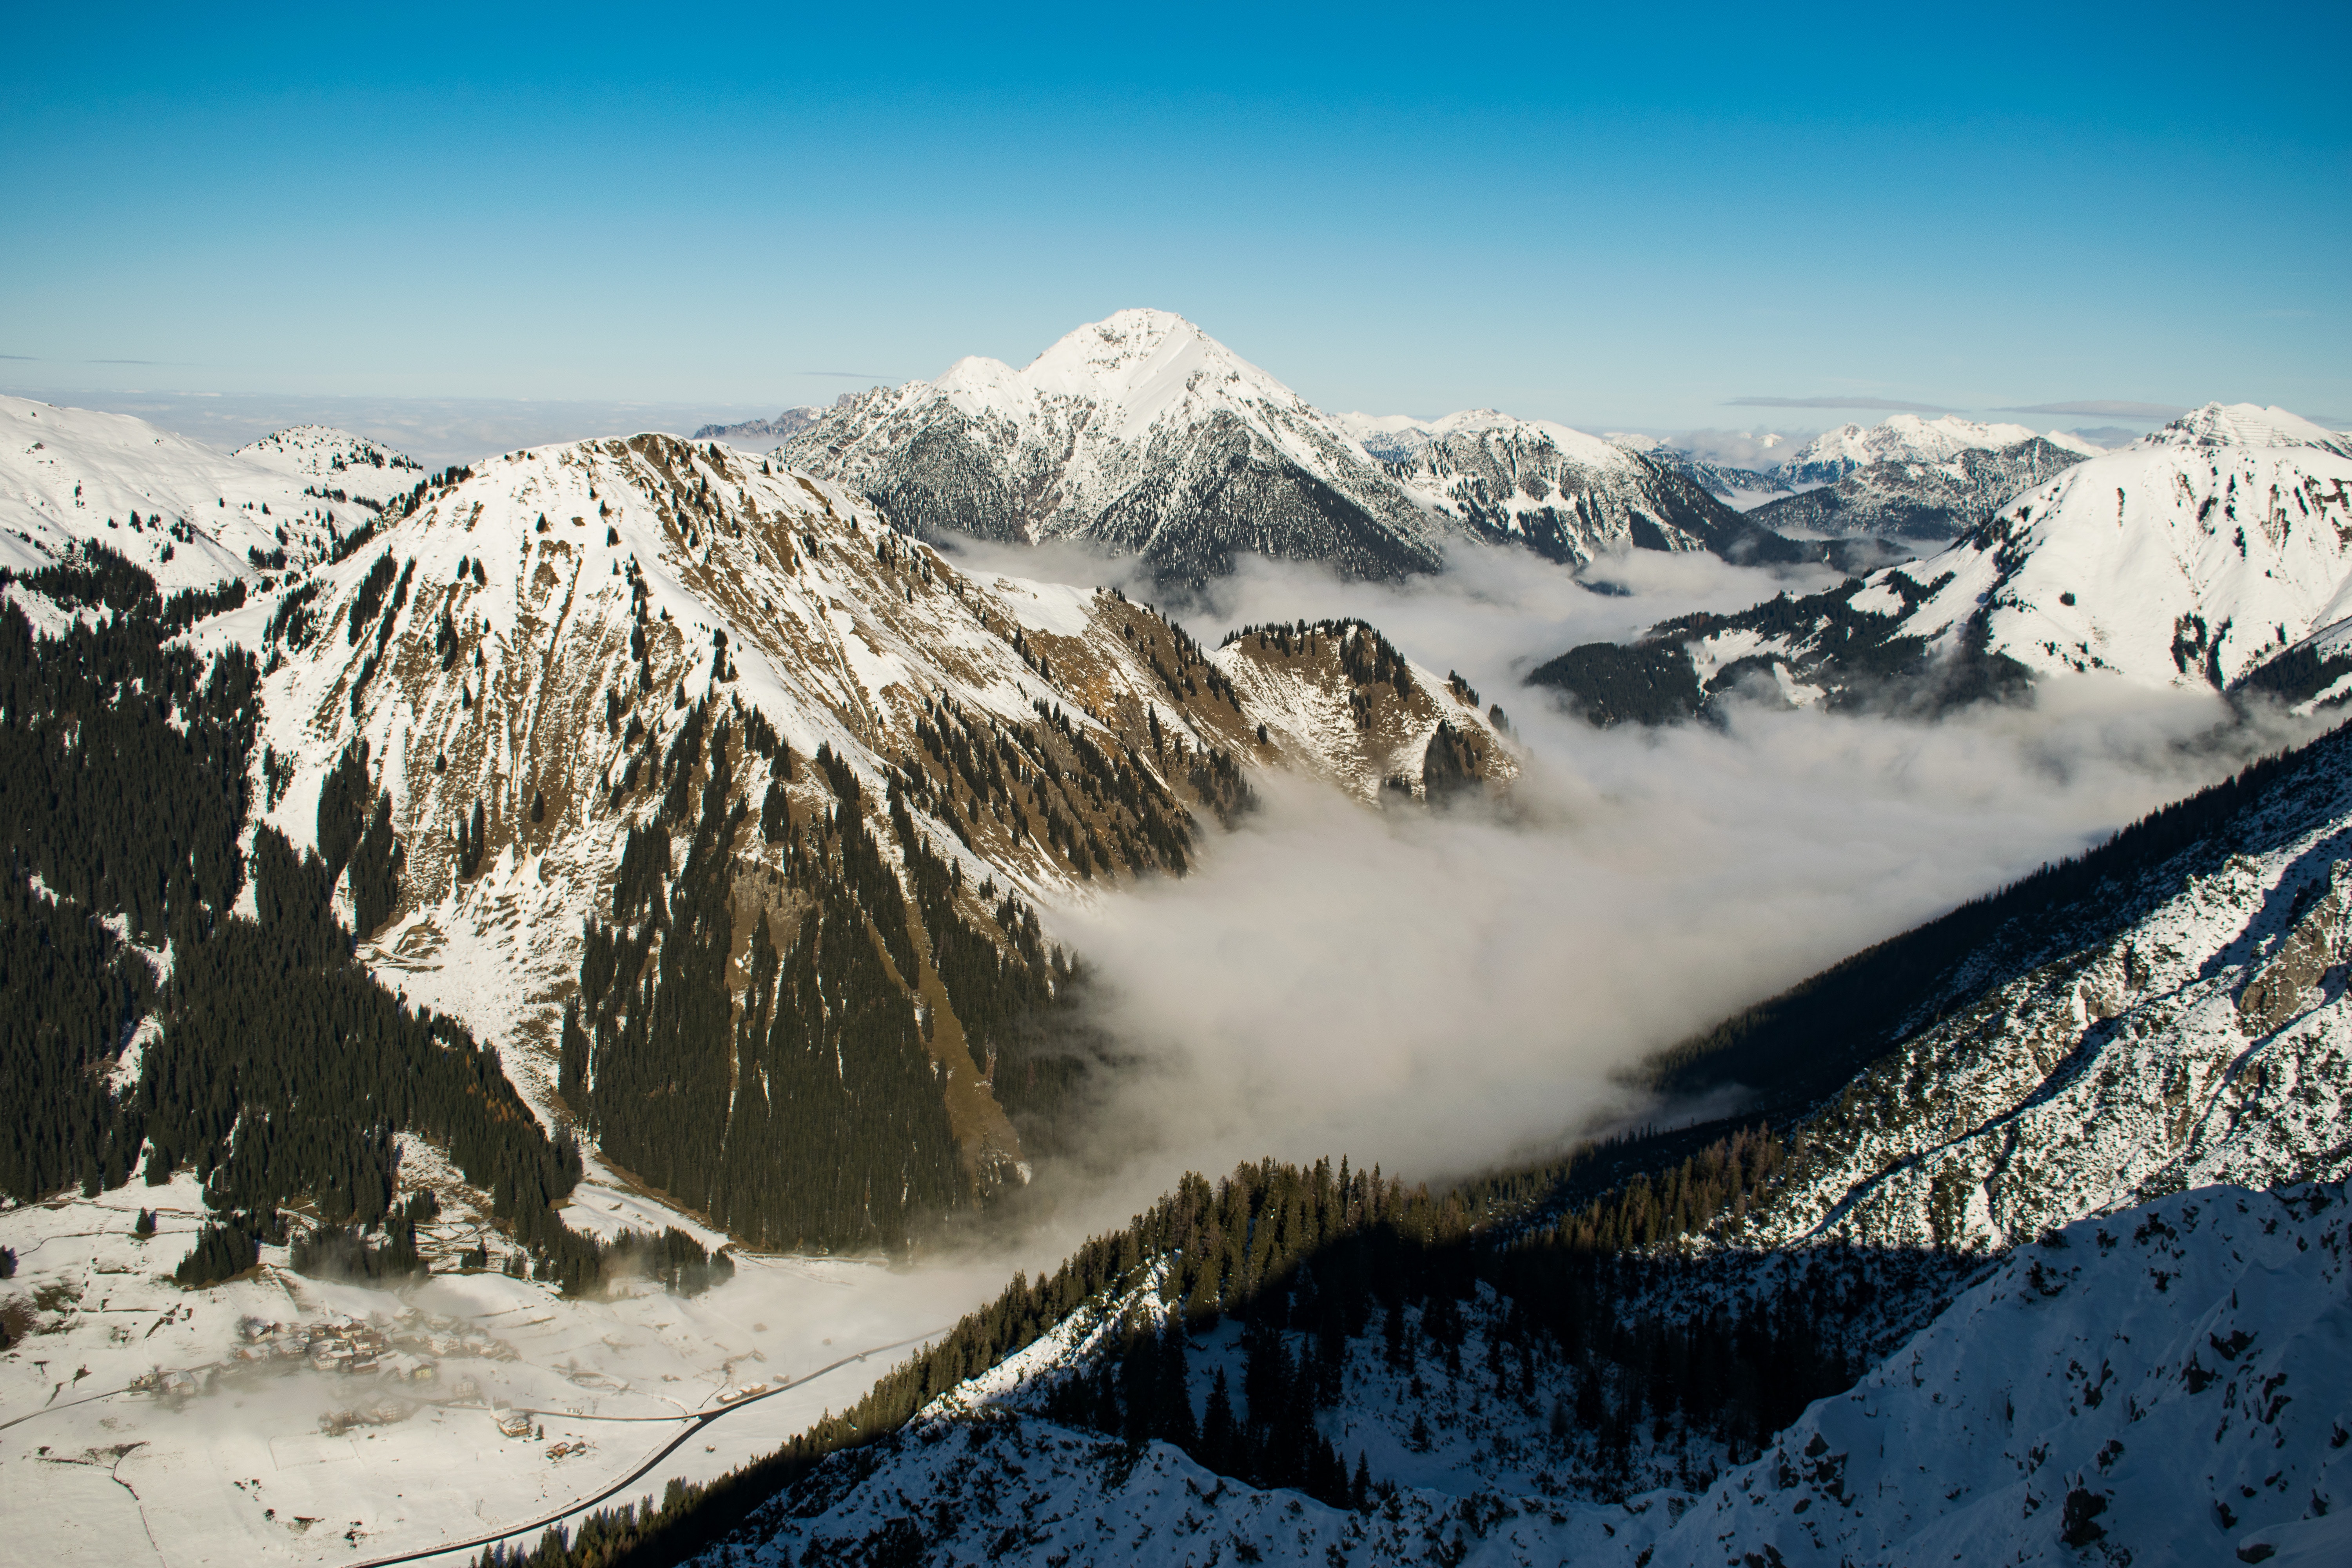 Rocky Mountain With Fog in Daytime Photo, Adventure, Mountain peak, Weather, View, HQ Photo